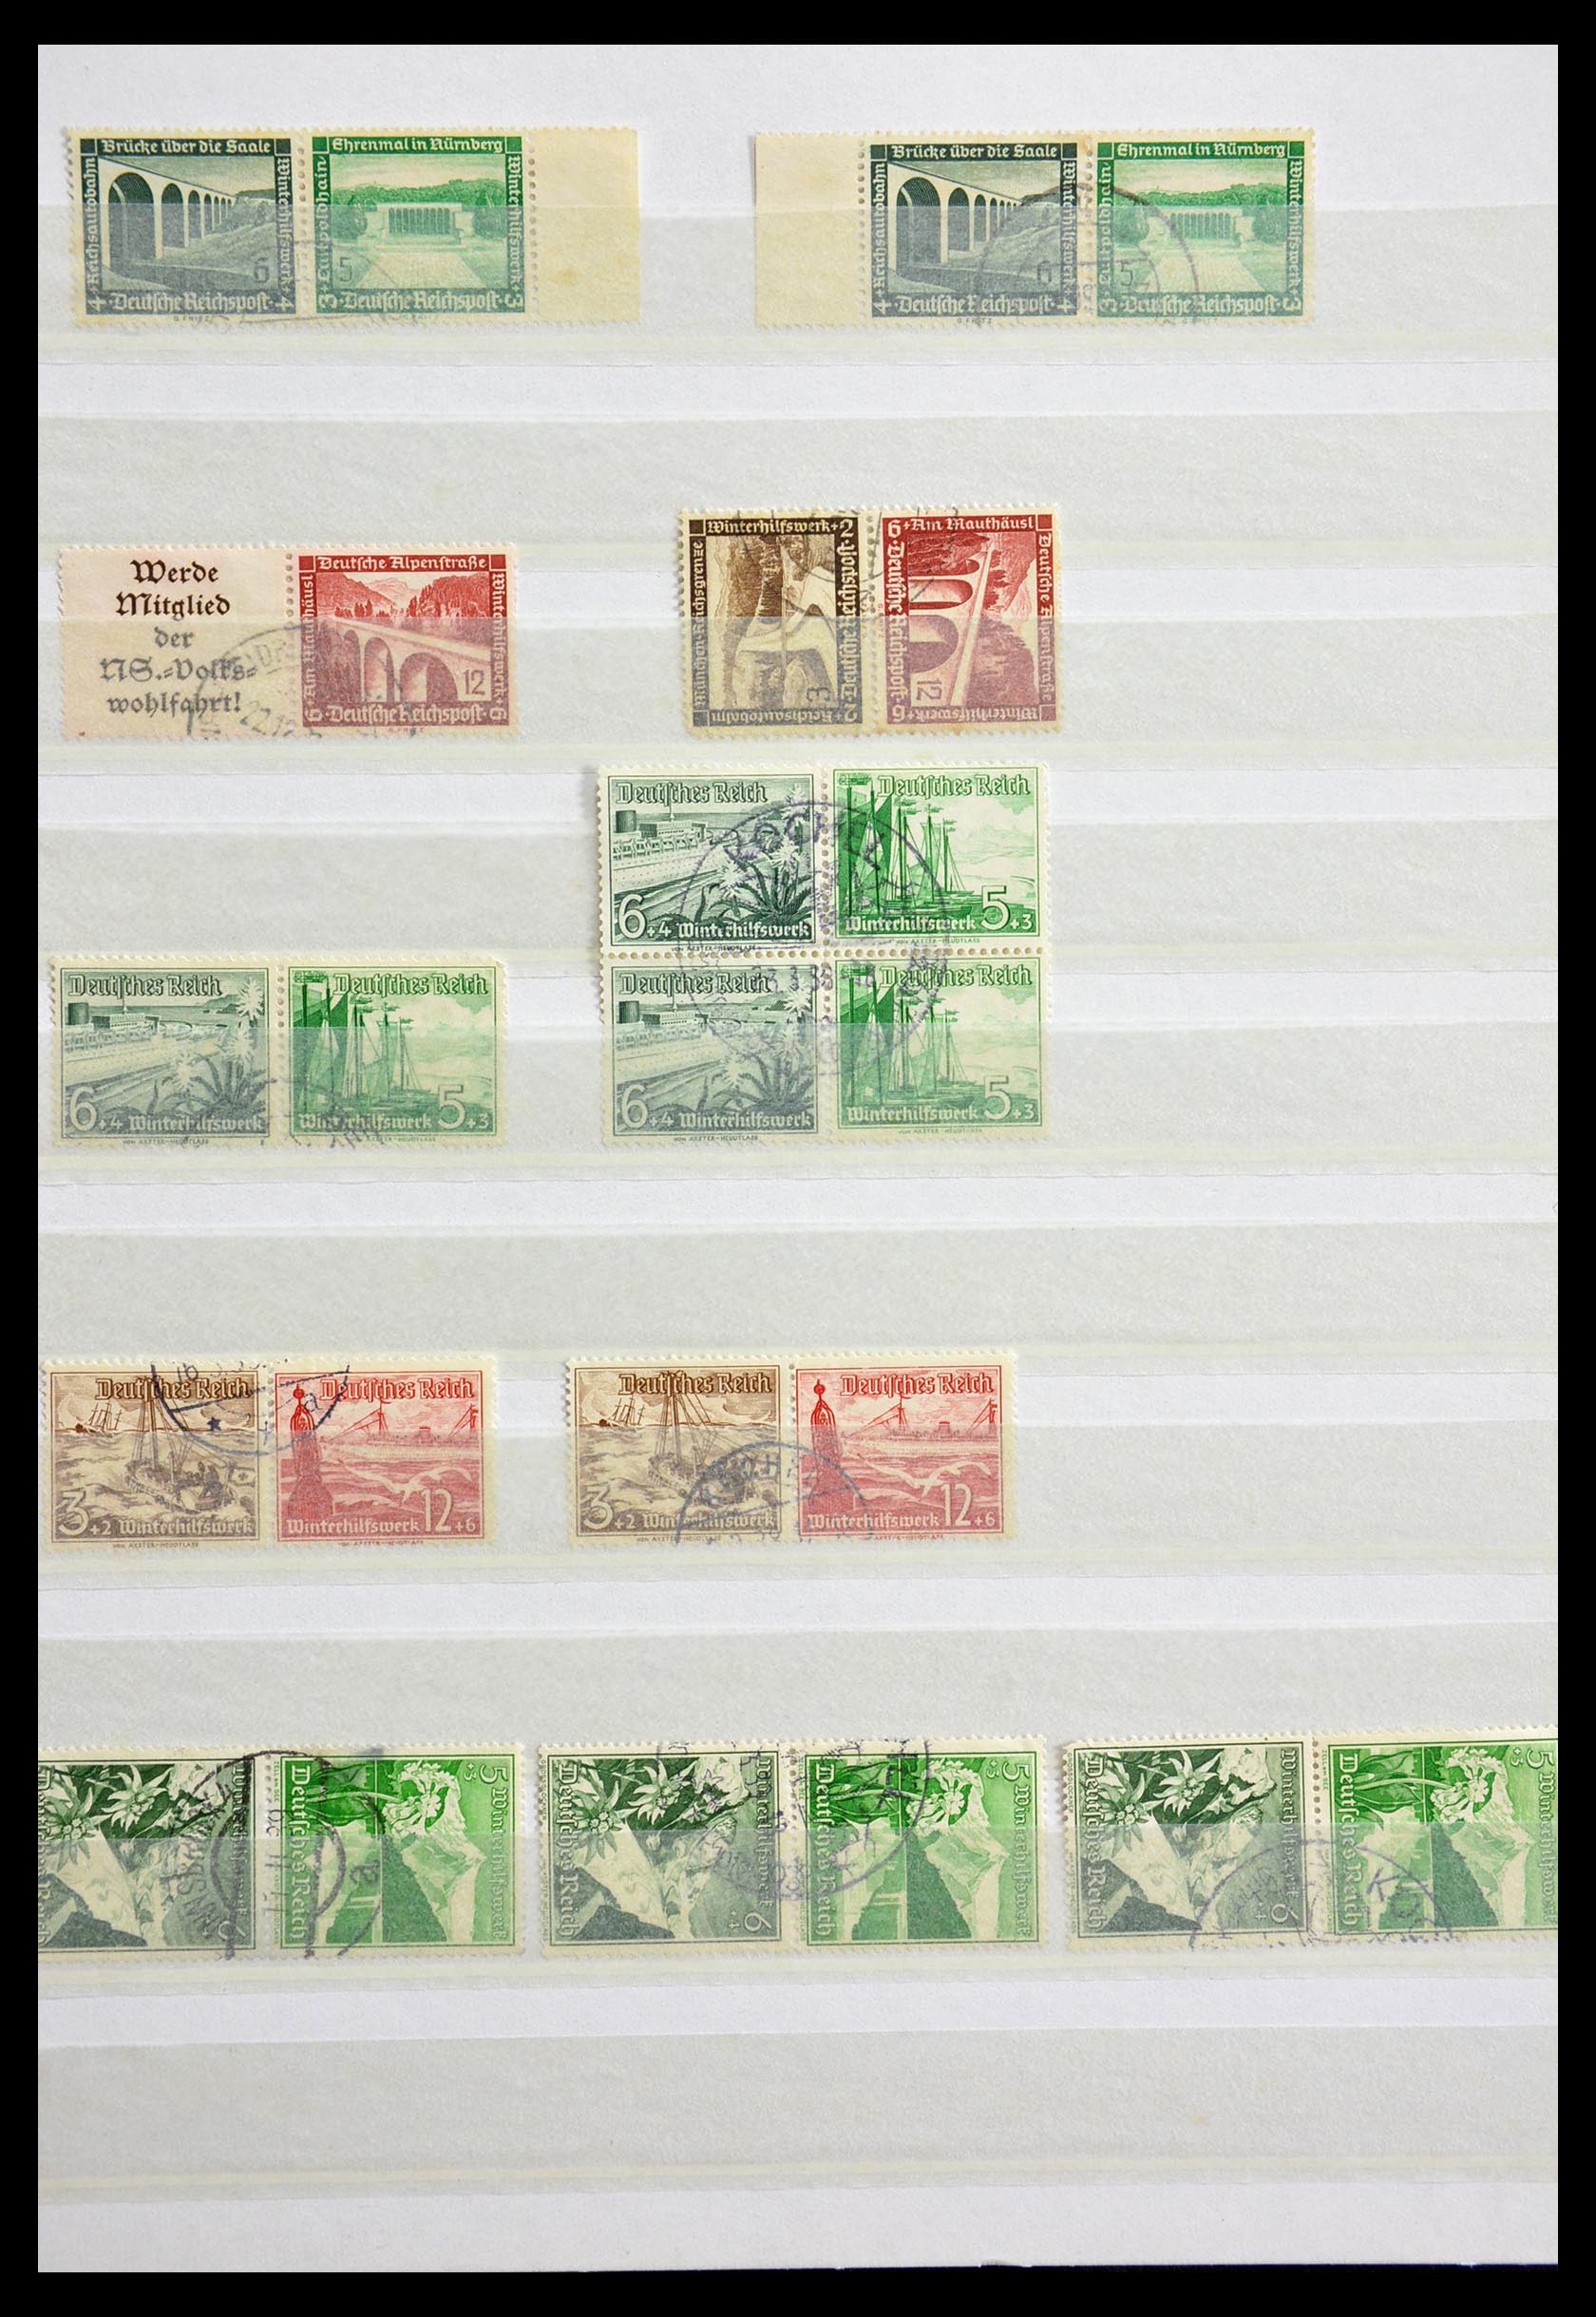 29315 011 - 29315 German Reich combinations cancelled.